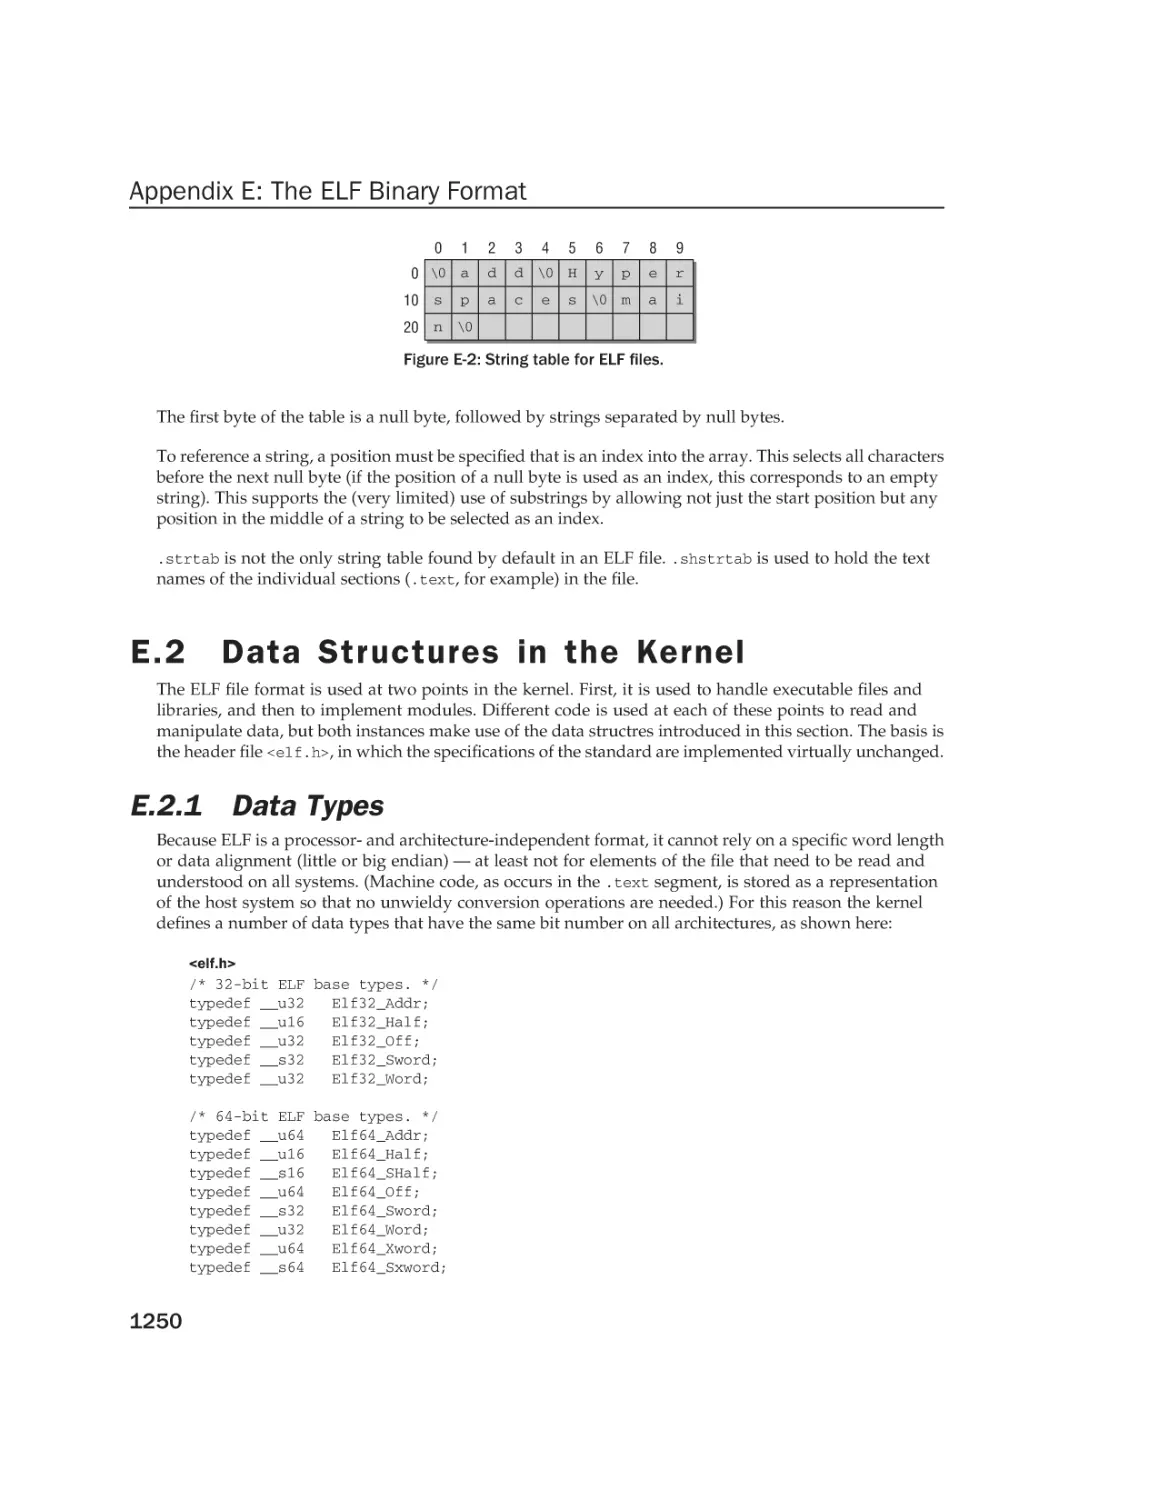 E.2 Data Structures in the Kernel